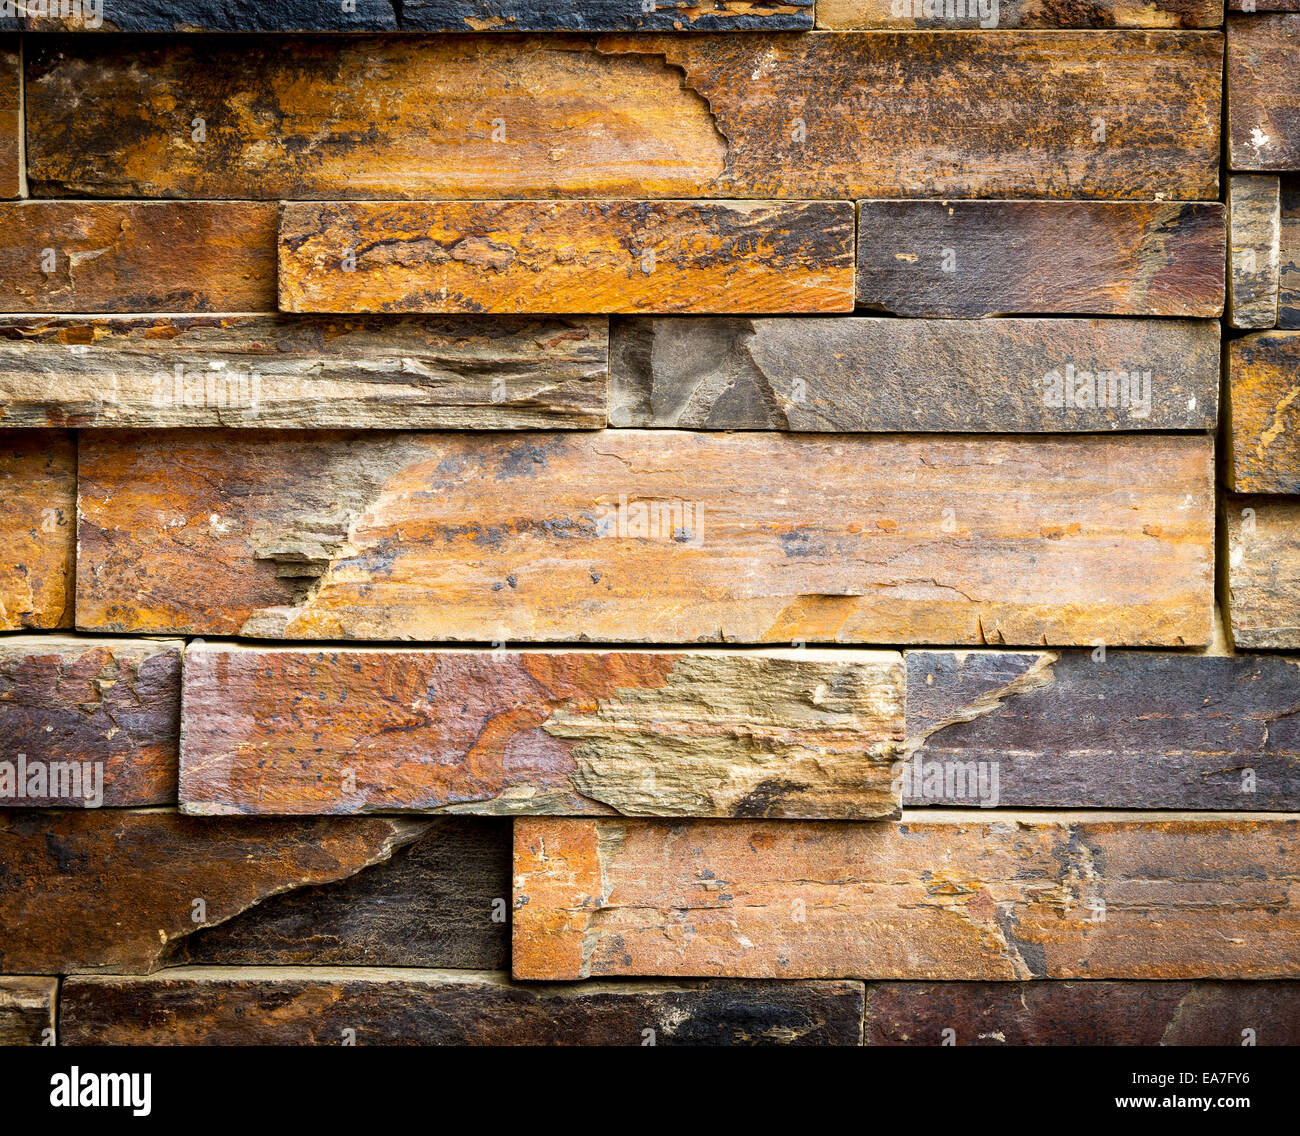 Stacked stone cladding building facade for background texture Stock Photo